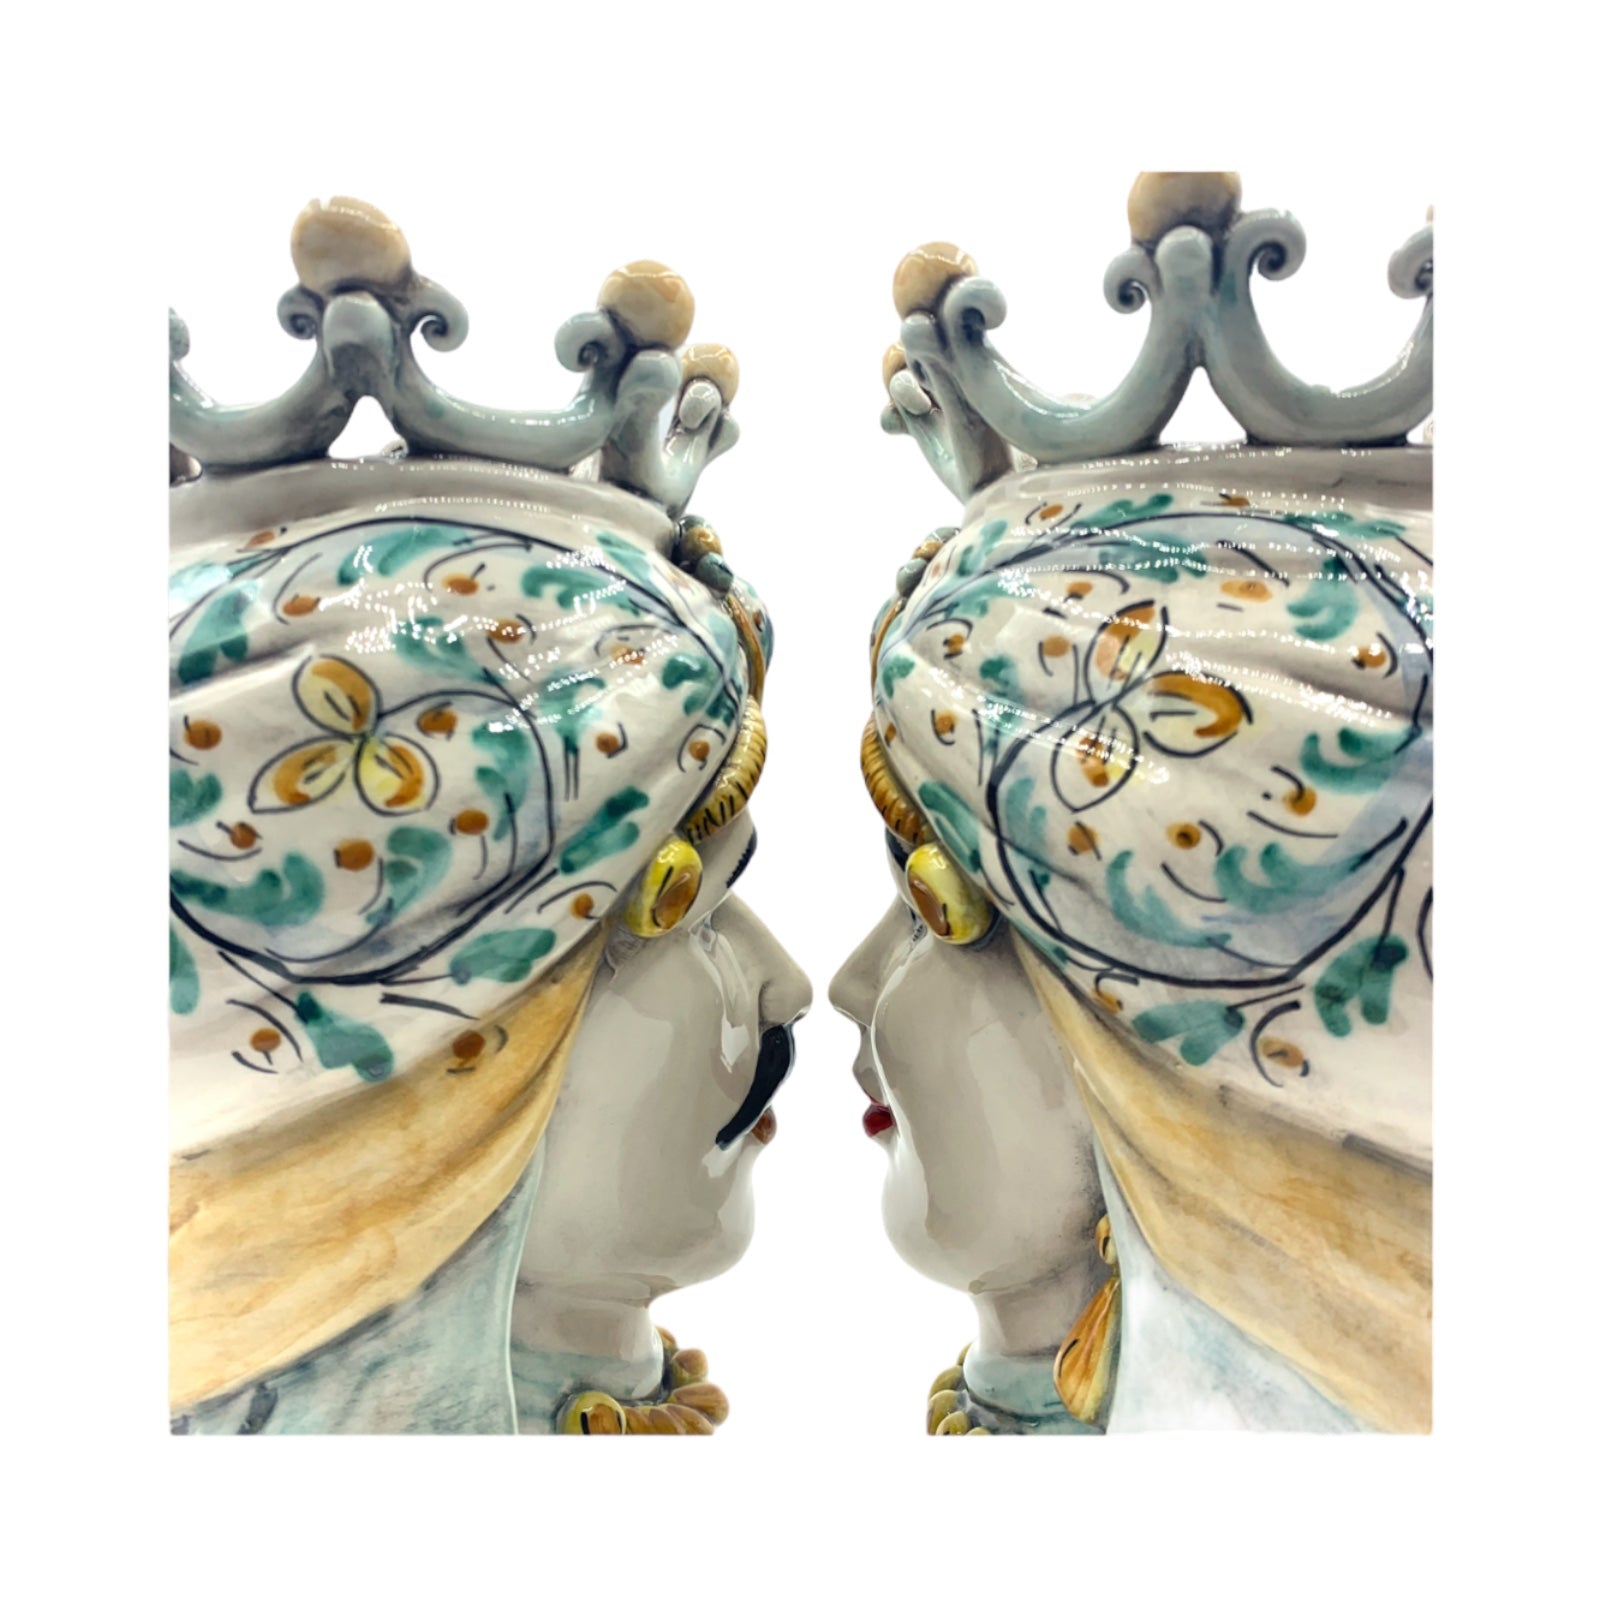 Couple Teste Di Moro From Caltagirone Moor’s Heads With Crown - Height 25 cm Classic Crown With Green Decoration